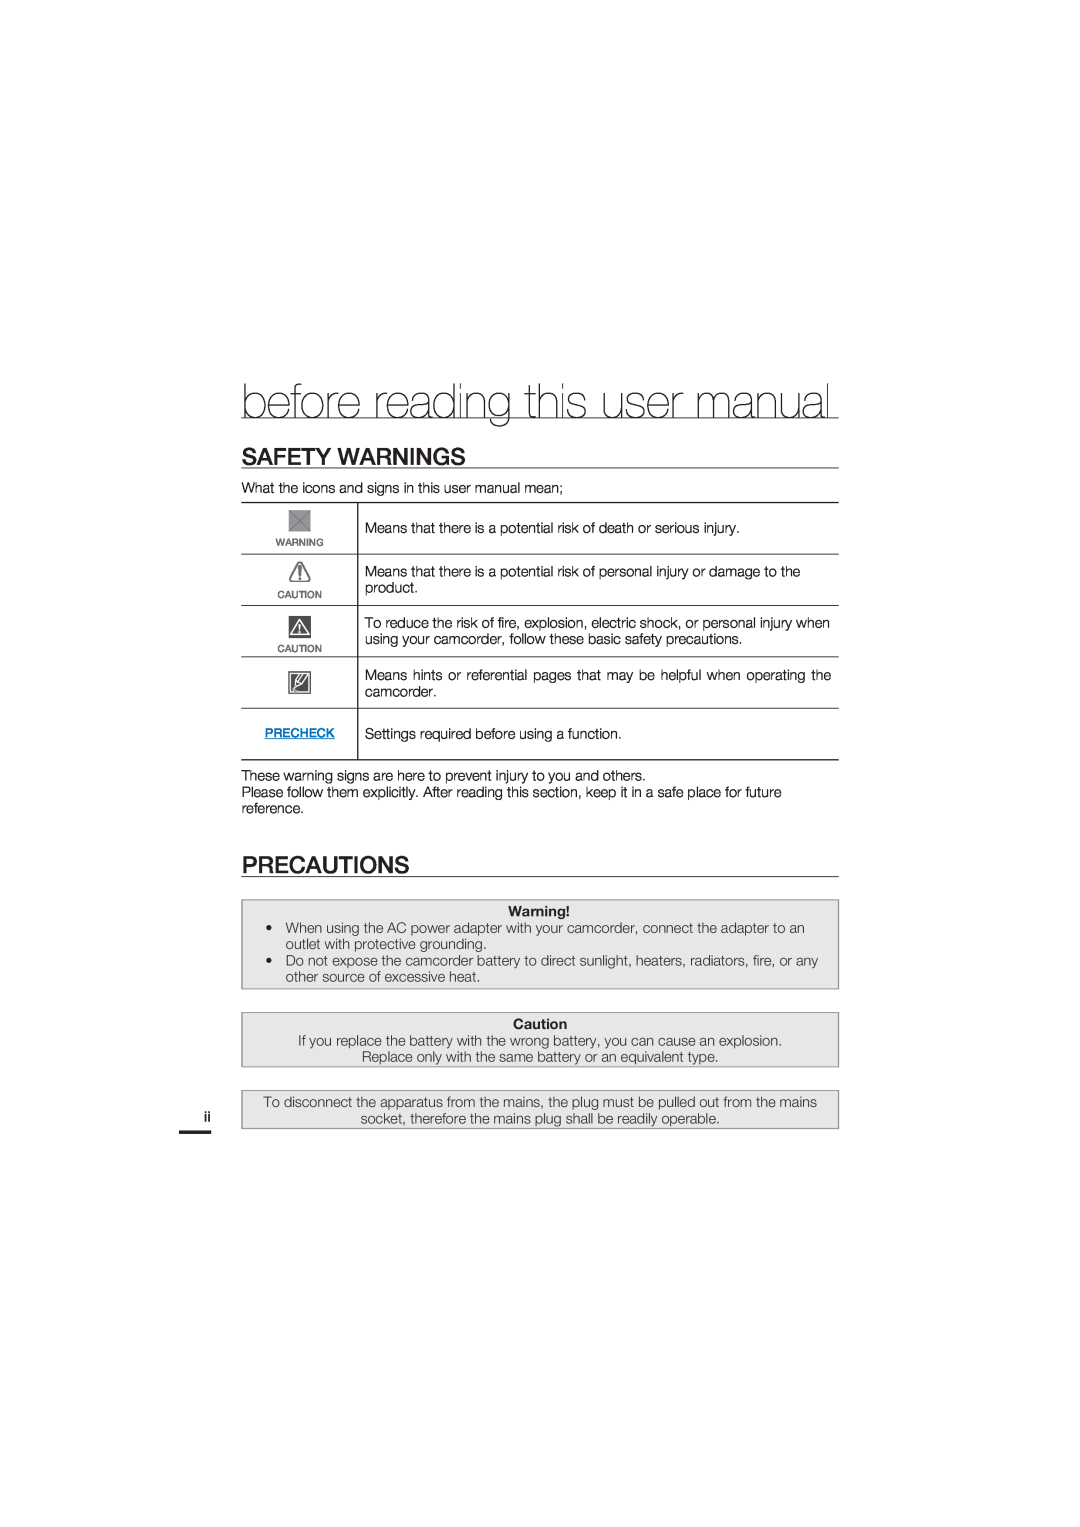 Samsung HMX-U20LP/EDC, HMX-U20RP/EDC, HMX-U20BP/EDC before reading this user manual, Safety Warnings, Precautions 